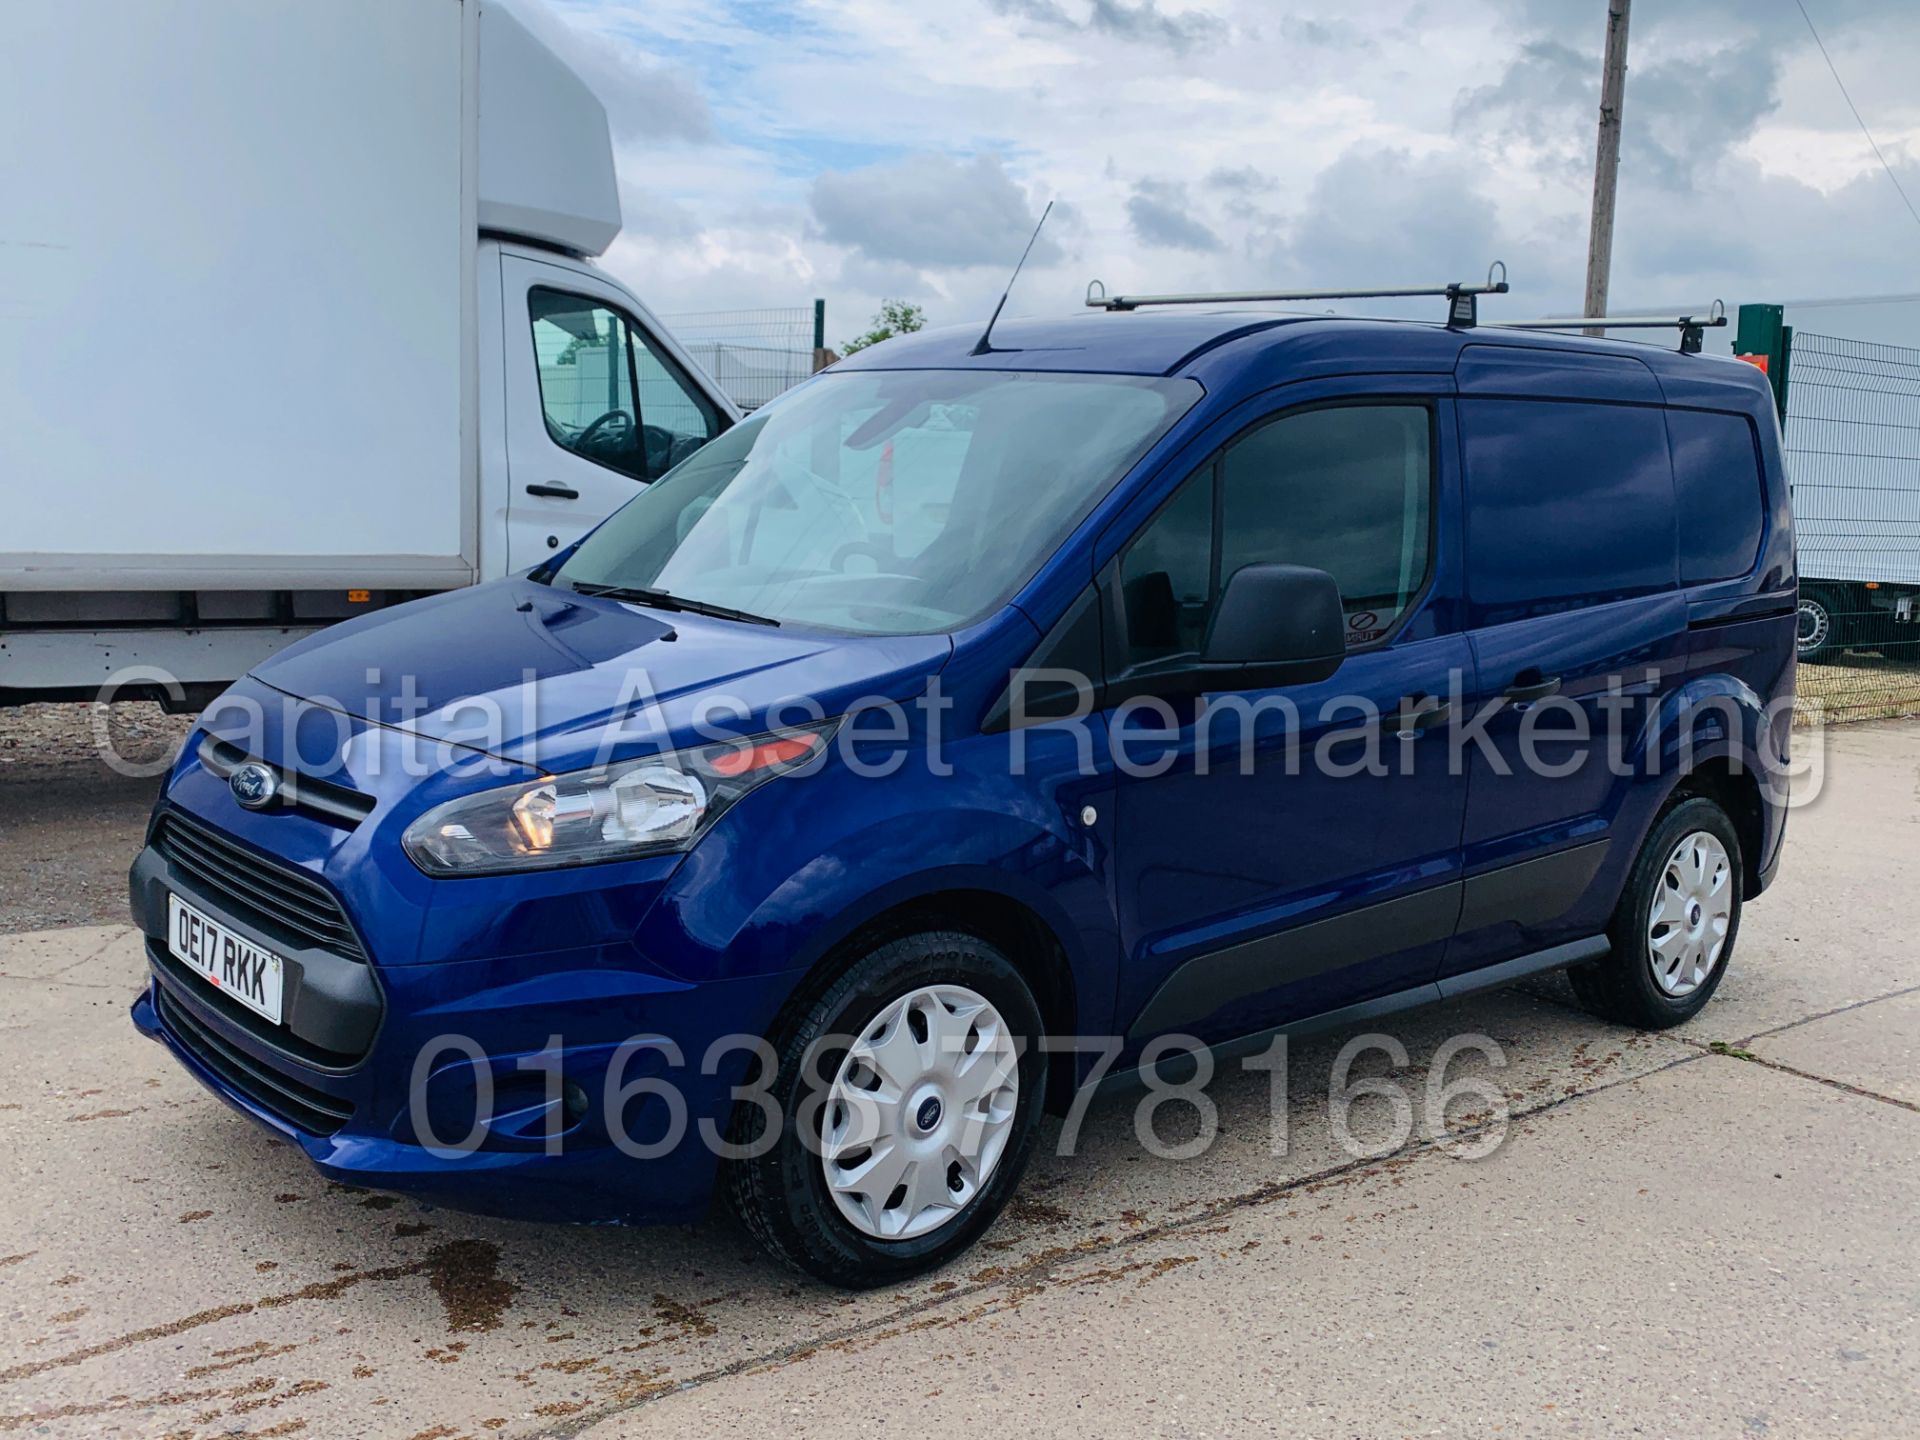 (On Sale) FORD TRANSIT CONNECT *TREND* SWB (2017 - EURO 6 VERSION) '1.5 TDCI - 100 BHP' (1 OWNER)